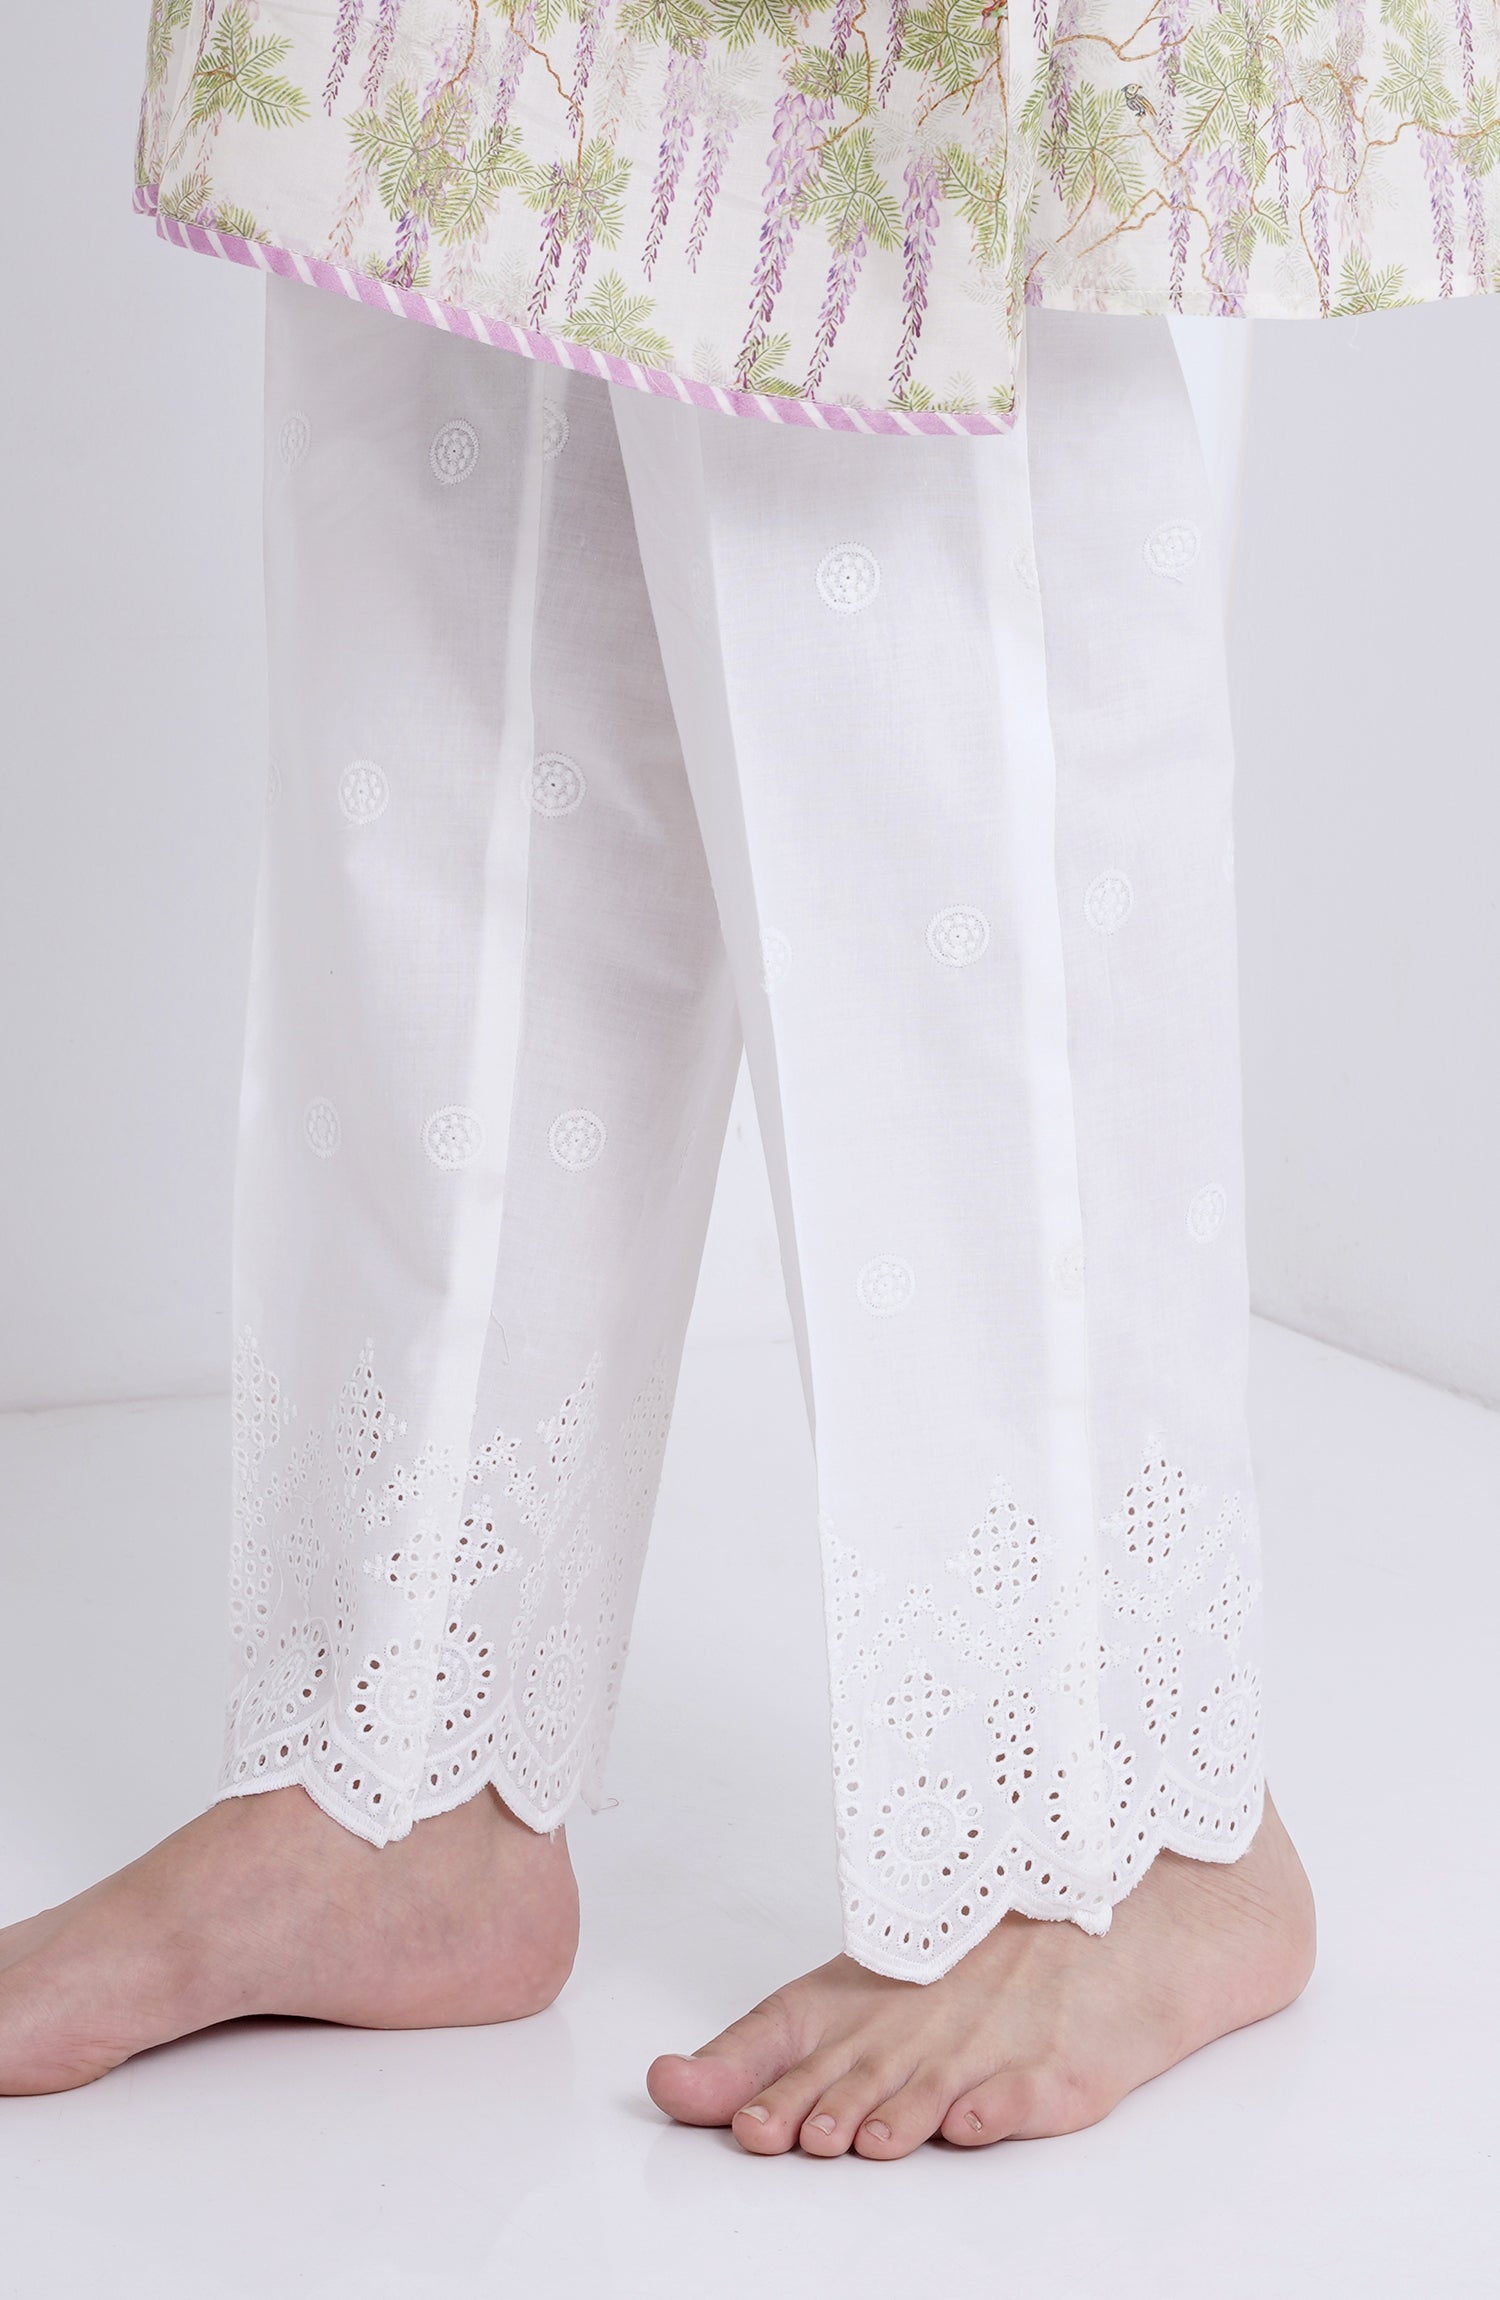 Embroidered Bootcut Trousers are Stylish, Flared & Classy | DESIblitz